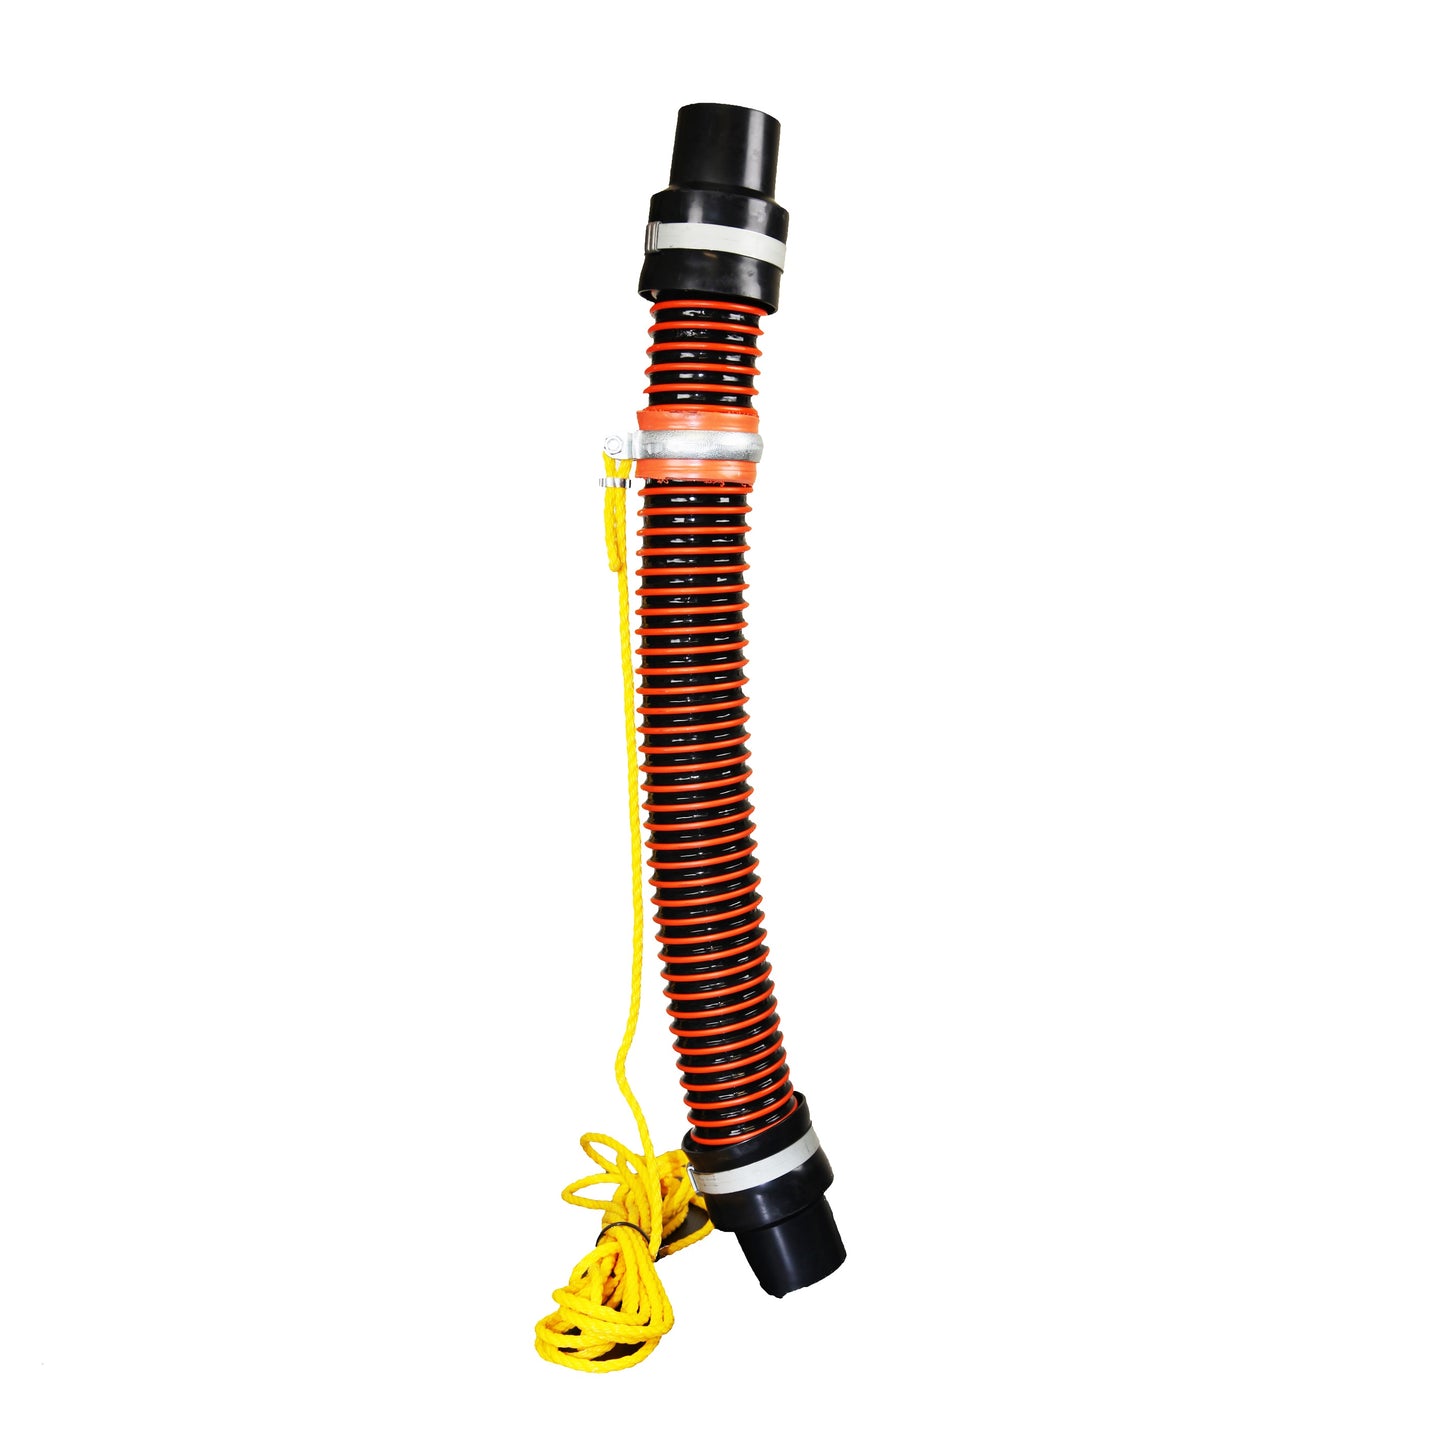 Tiger Tail Sewer Hose Guide